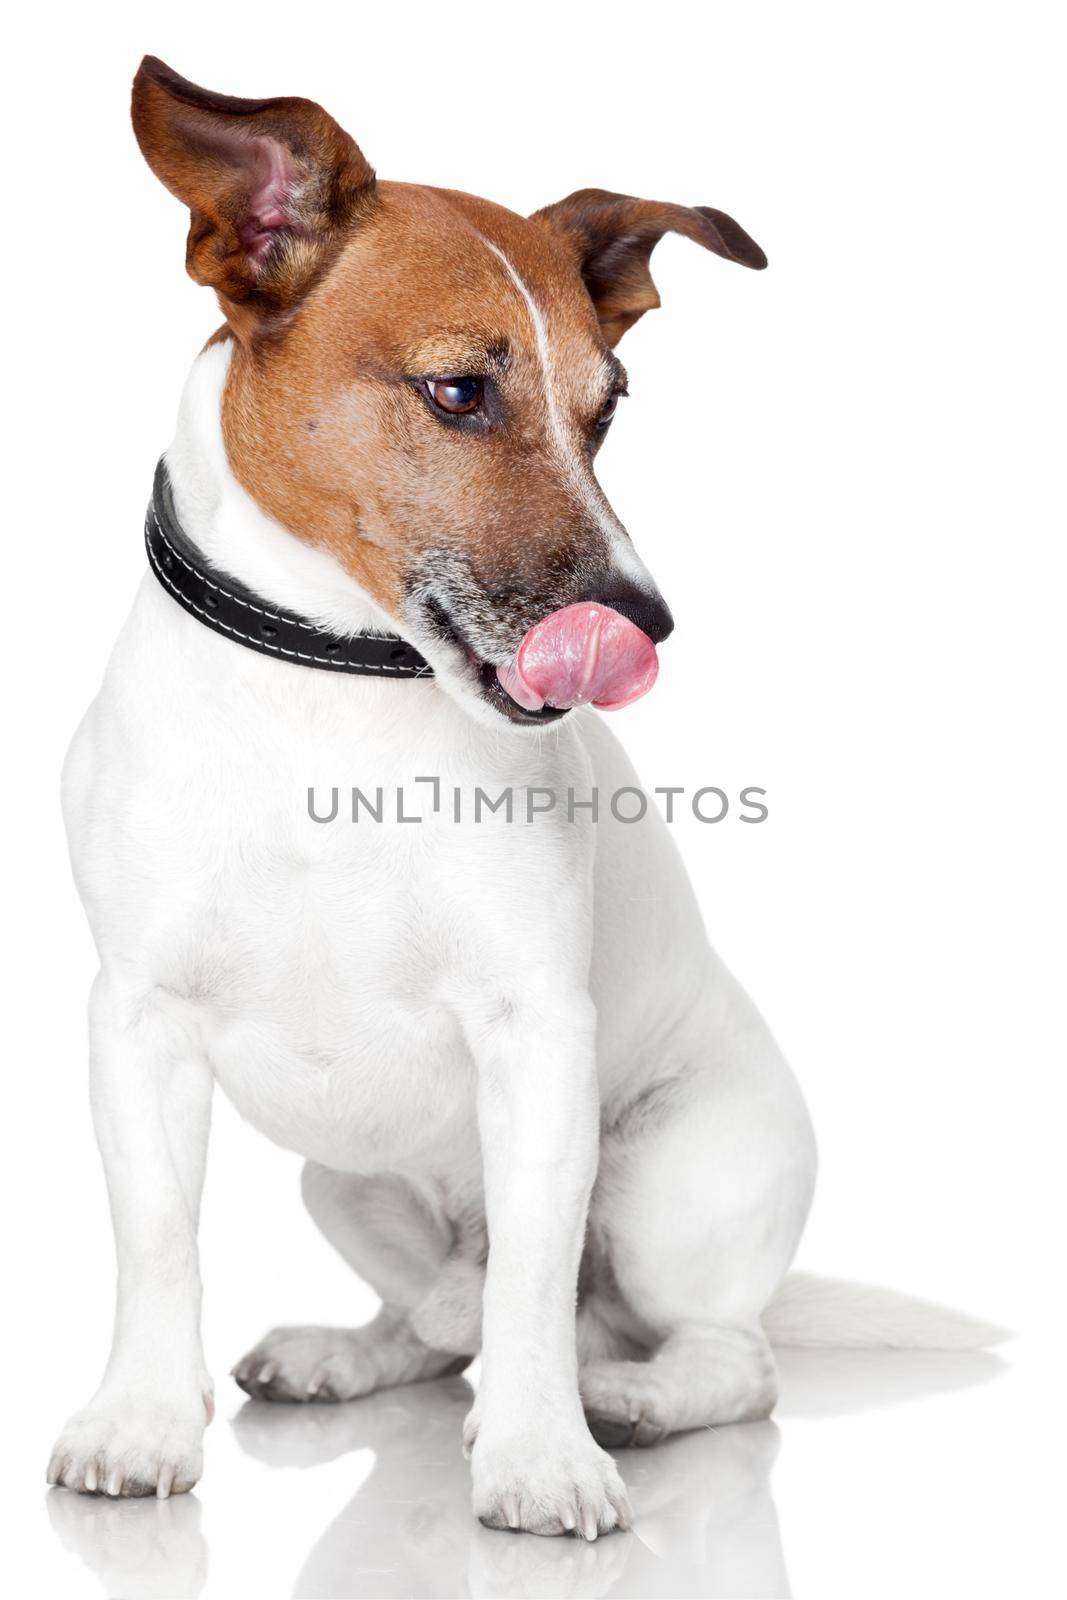 hungry dog licking tongue by Brosch